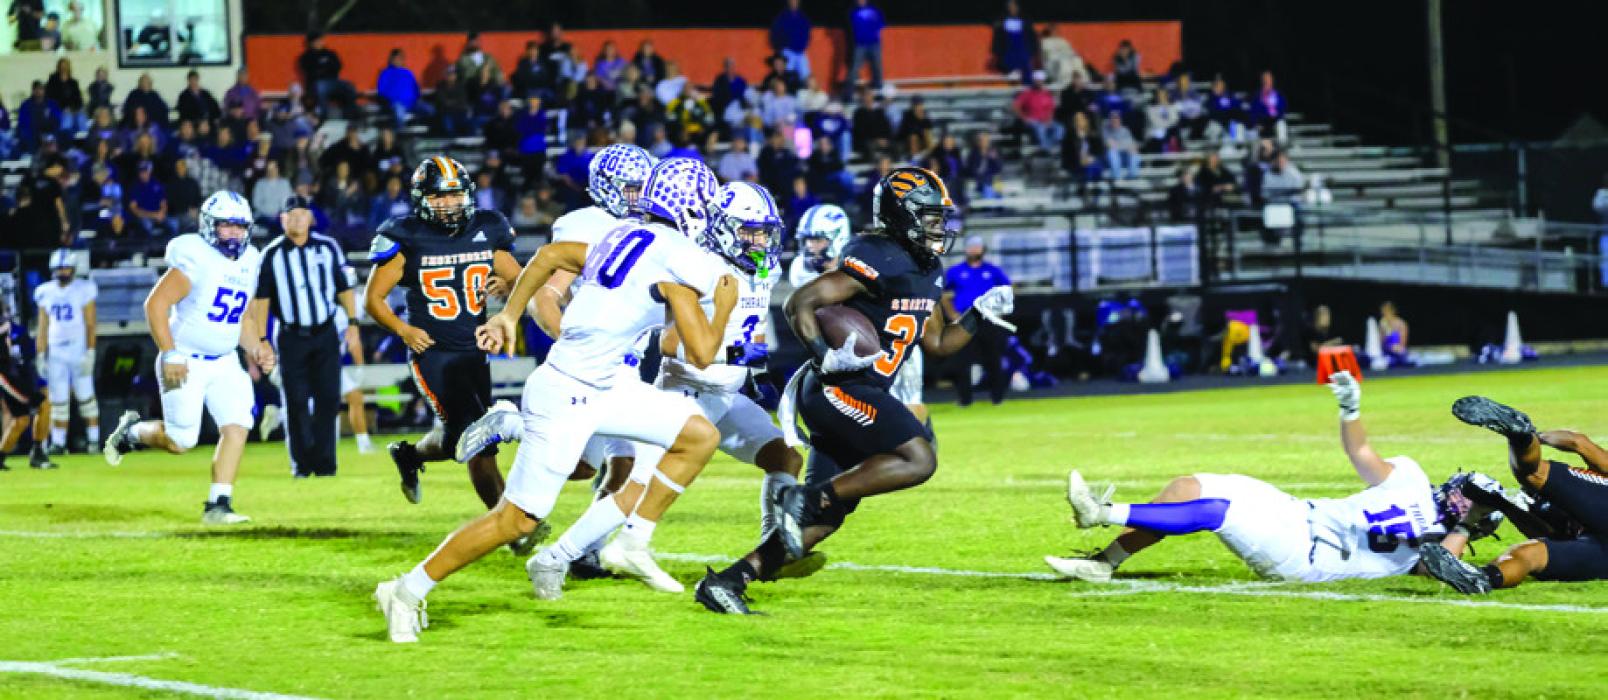 A host of Schulenburg defensive players converge to make this tackle Friday against Thrall. Photo by Audrey Kristynik A pack of Thrall Tigers chases Shorthorn senior running back Rodney Walton. Photo by Andy Behlen